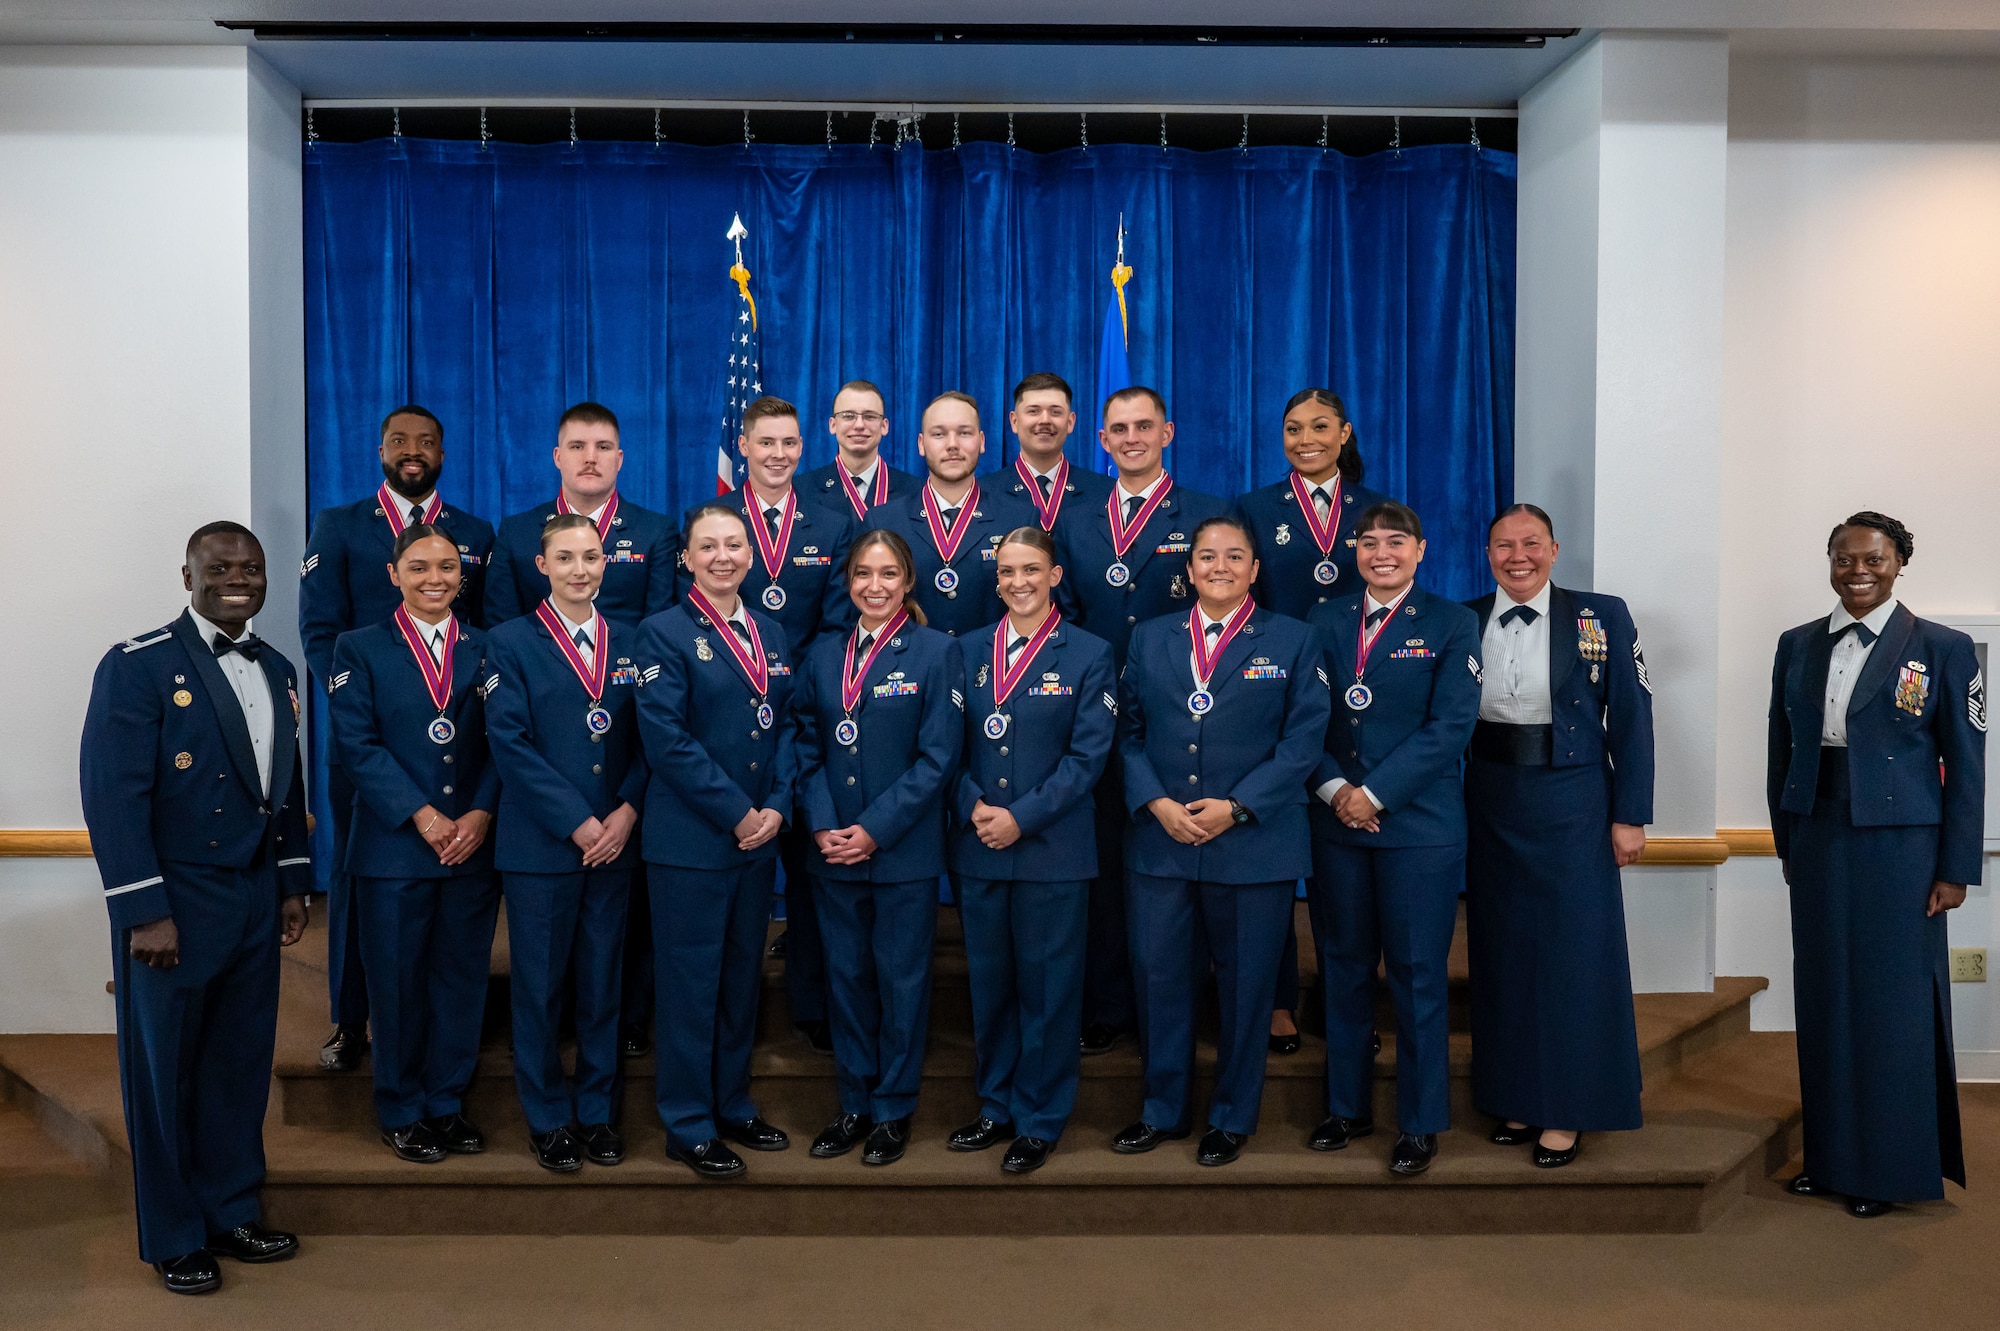 group photo of airmen in mess dress uniforms